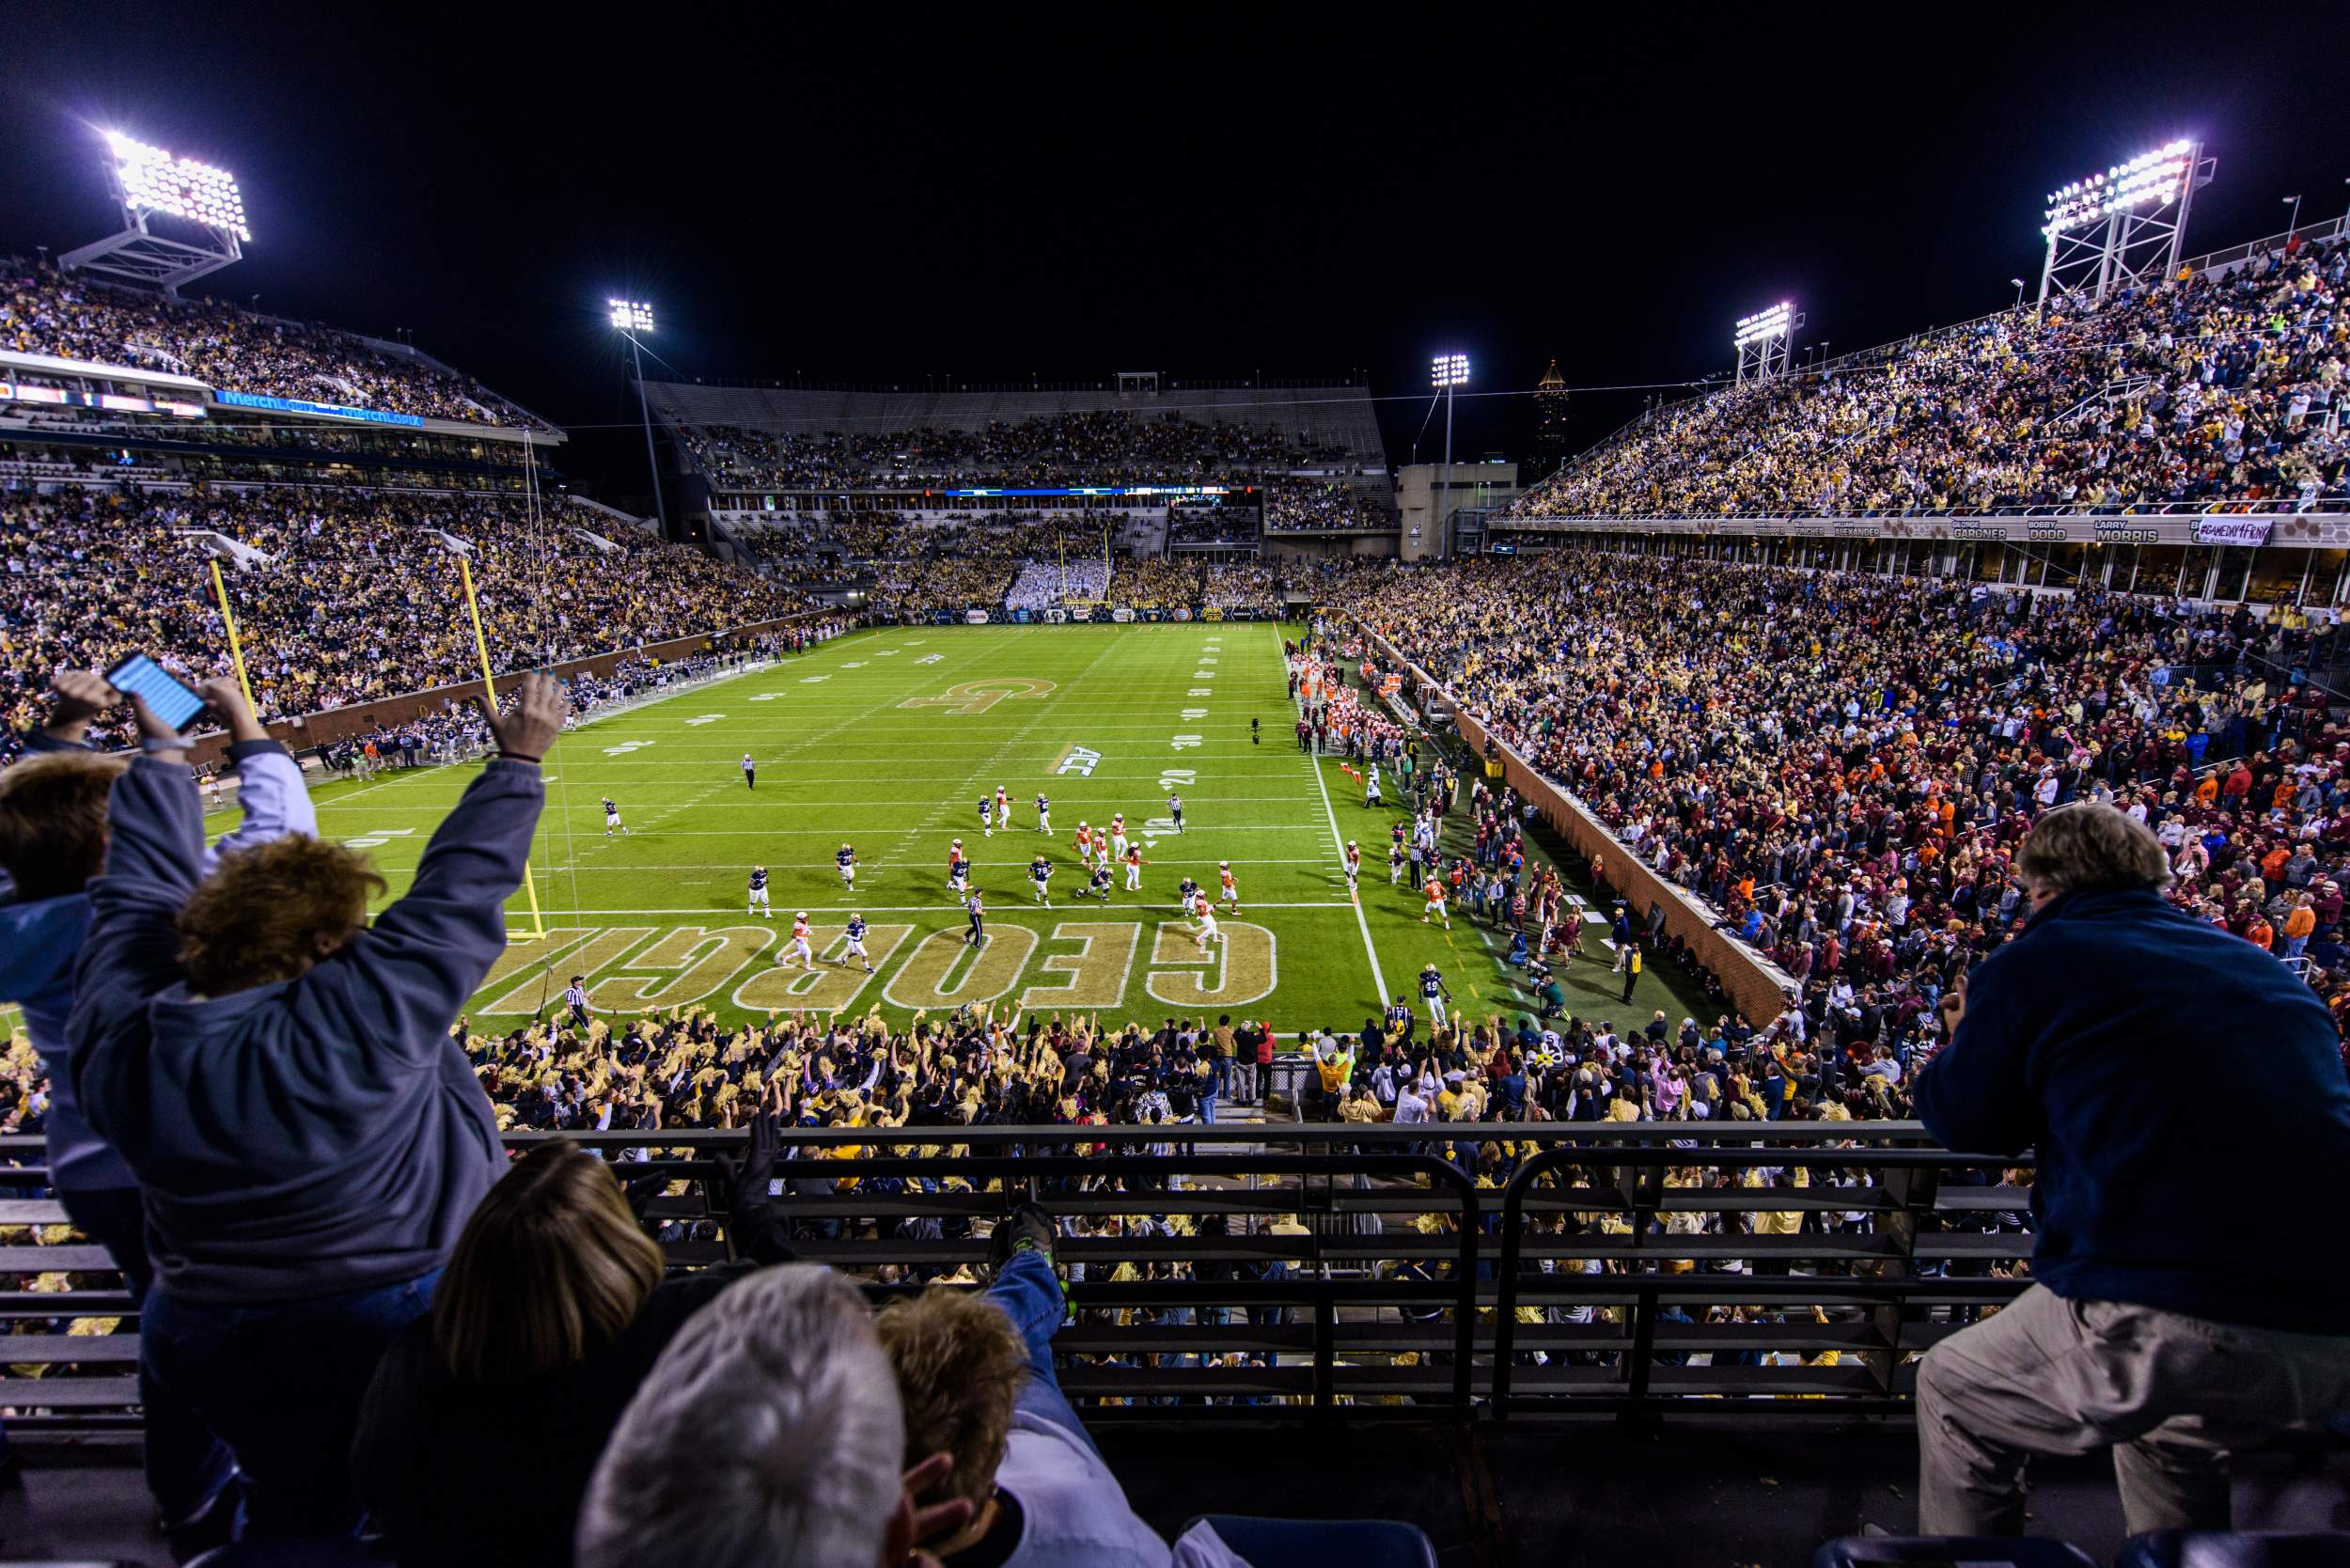 Bobby Dodd Stadium Seating Chart With Seat Numbers